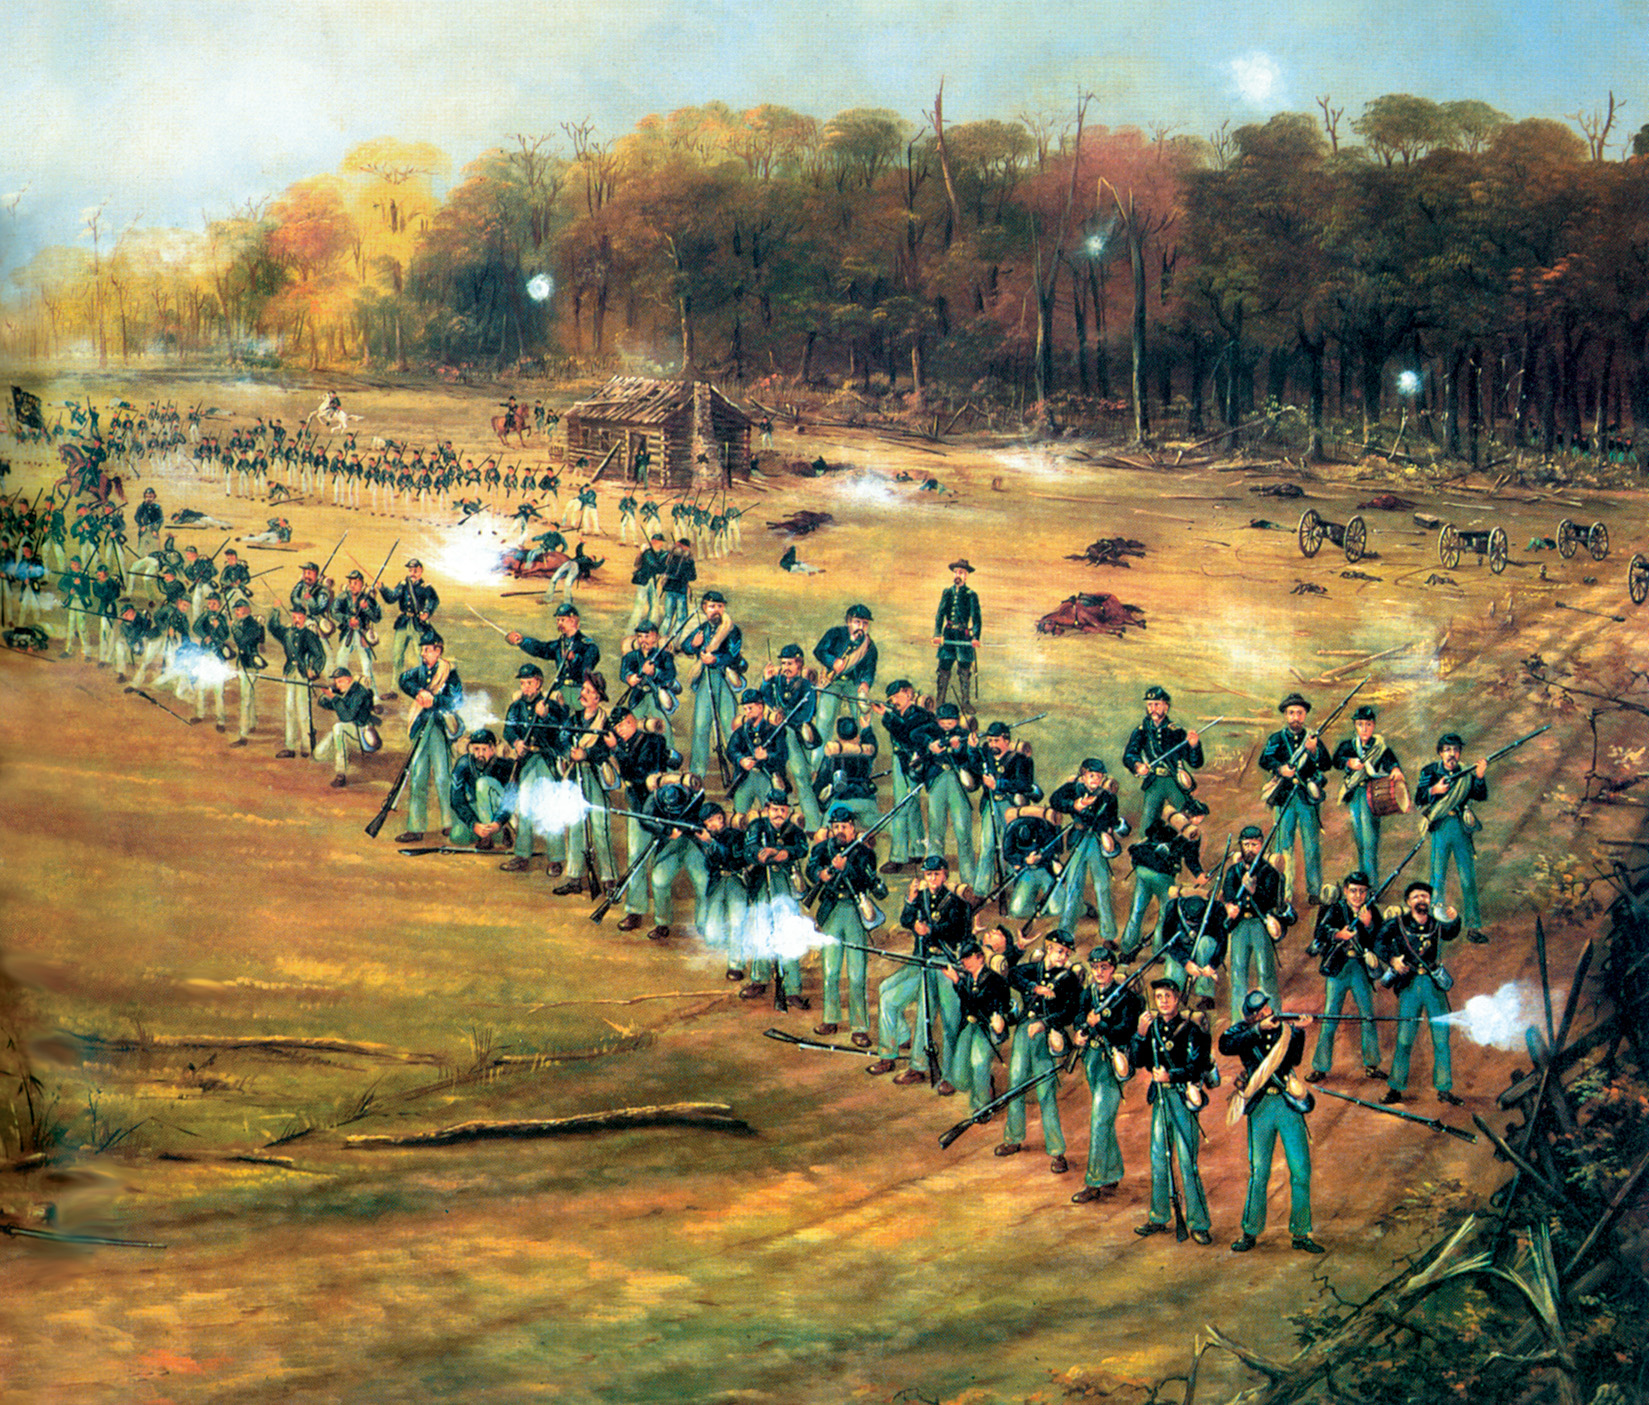 Brig. Gen. Absalom Baird's division of the XIV Corps included a brigade of U.S. regulars that helped cover the XIV Corps’ eventual withdrawal to Chattanooga. When President Abraham Lincoln removed Rosecrans, he gave Thomas command of his army. 